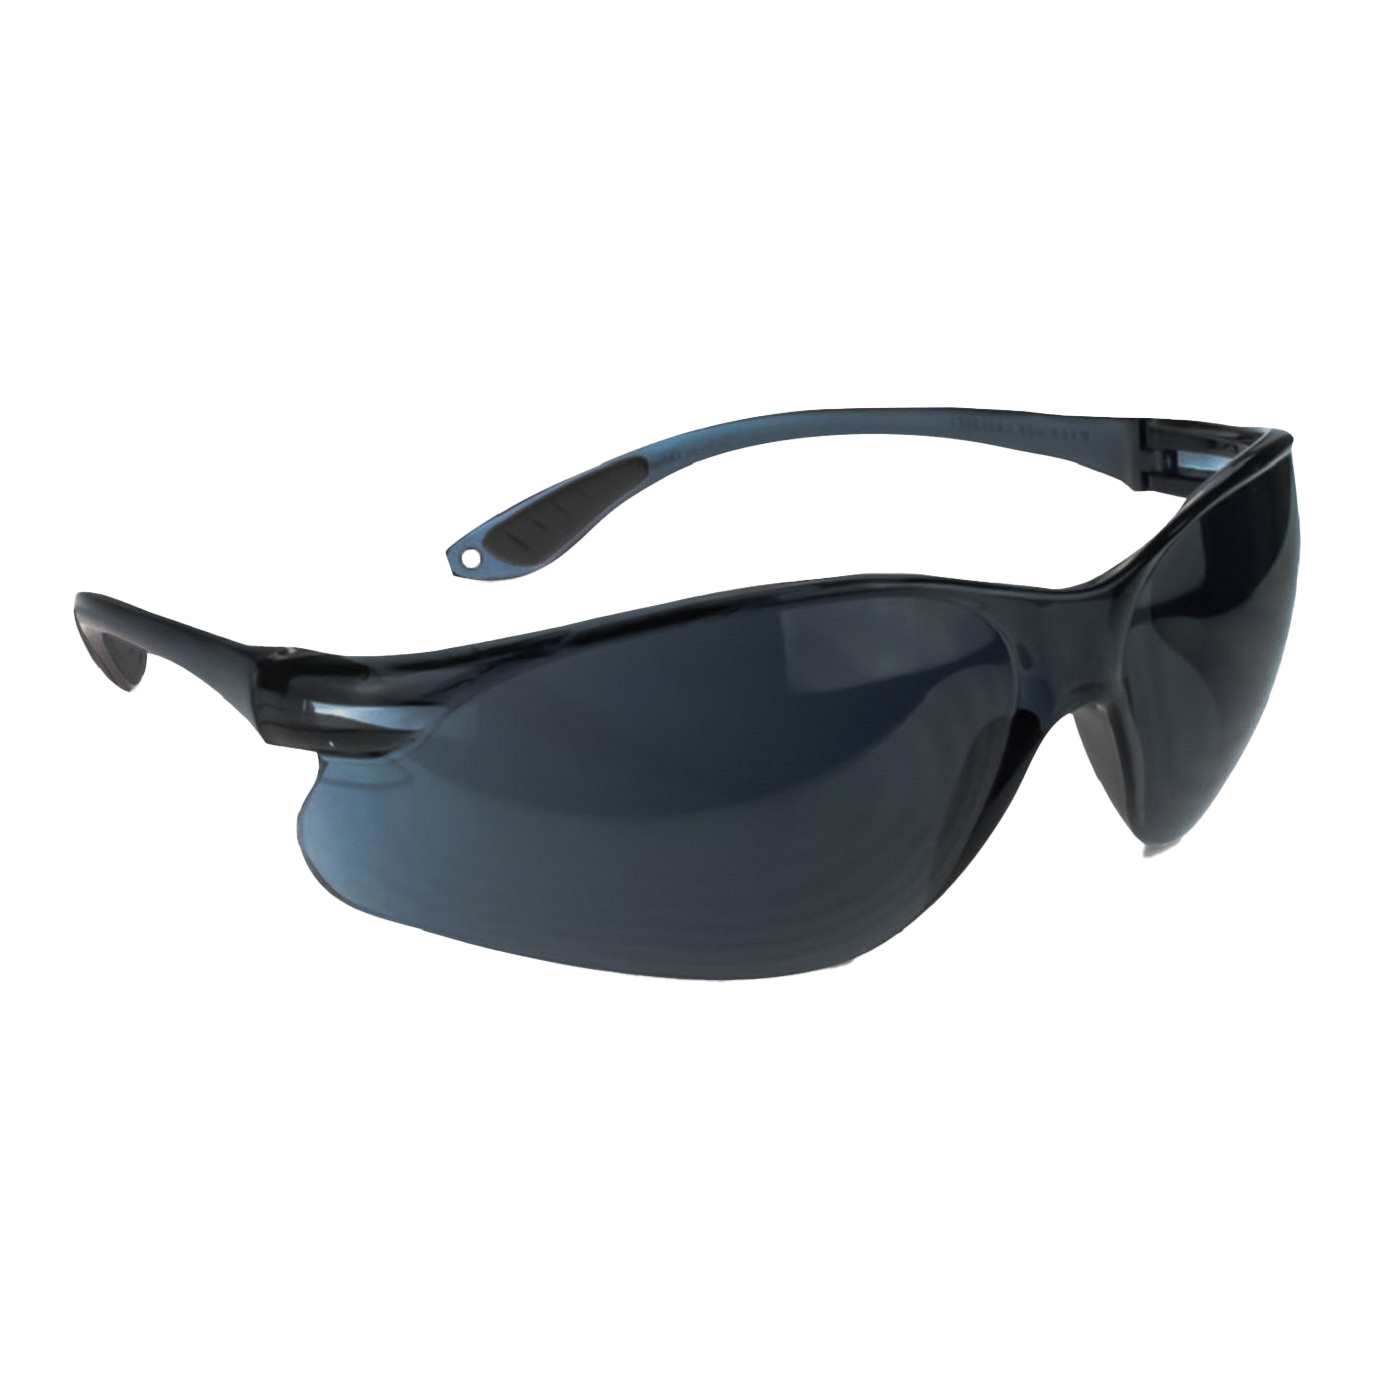 Weldmark by Radians Passage gray frameless safety glasses, with smoke polycarbonate scratch resistant flexible lenses.